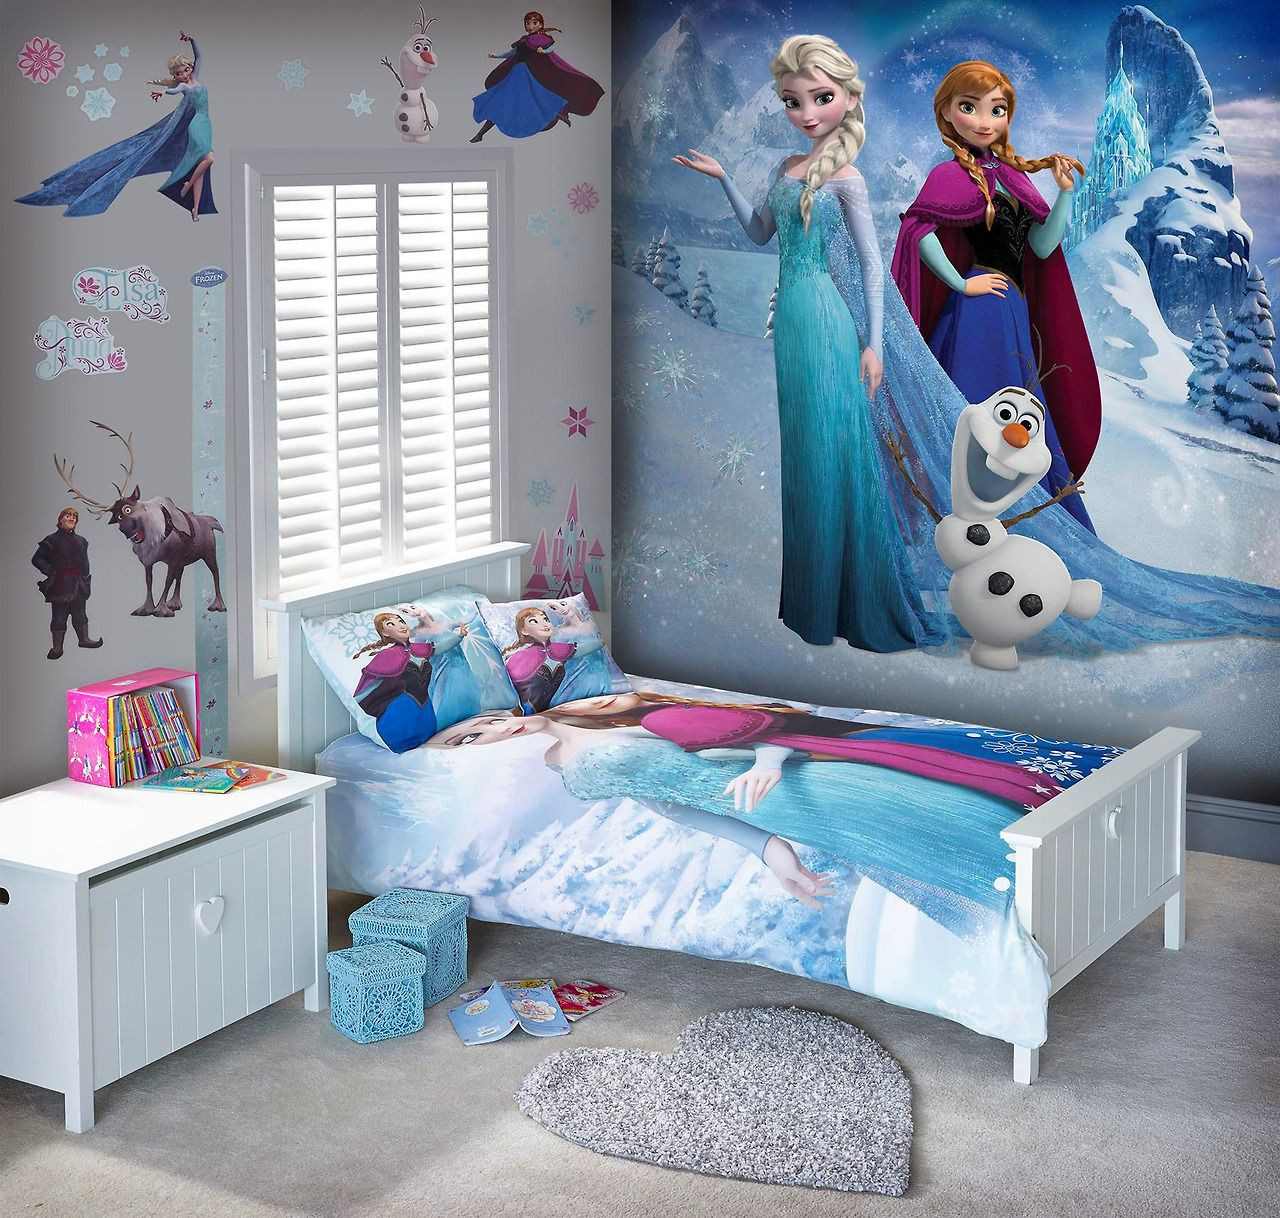 Frozen Decor For Bedroom
 Disney™ frozen large wall mural from Next